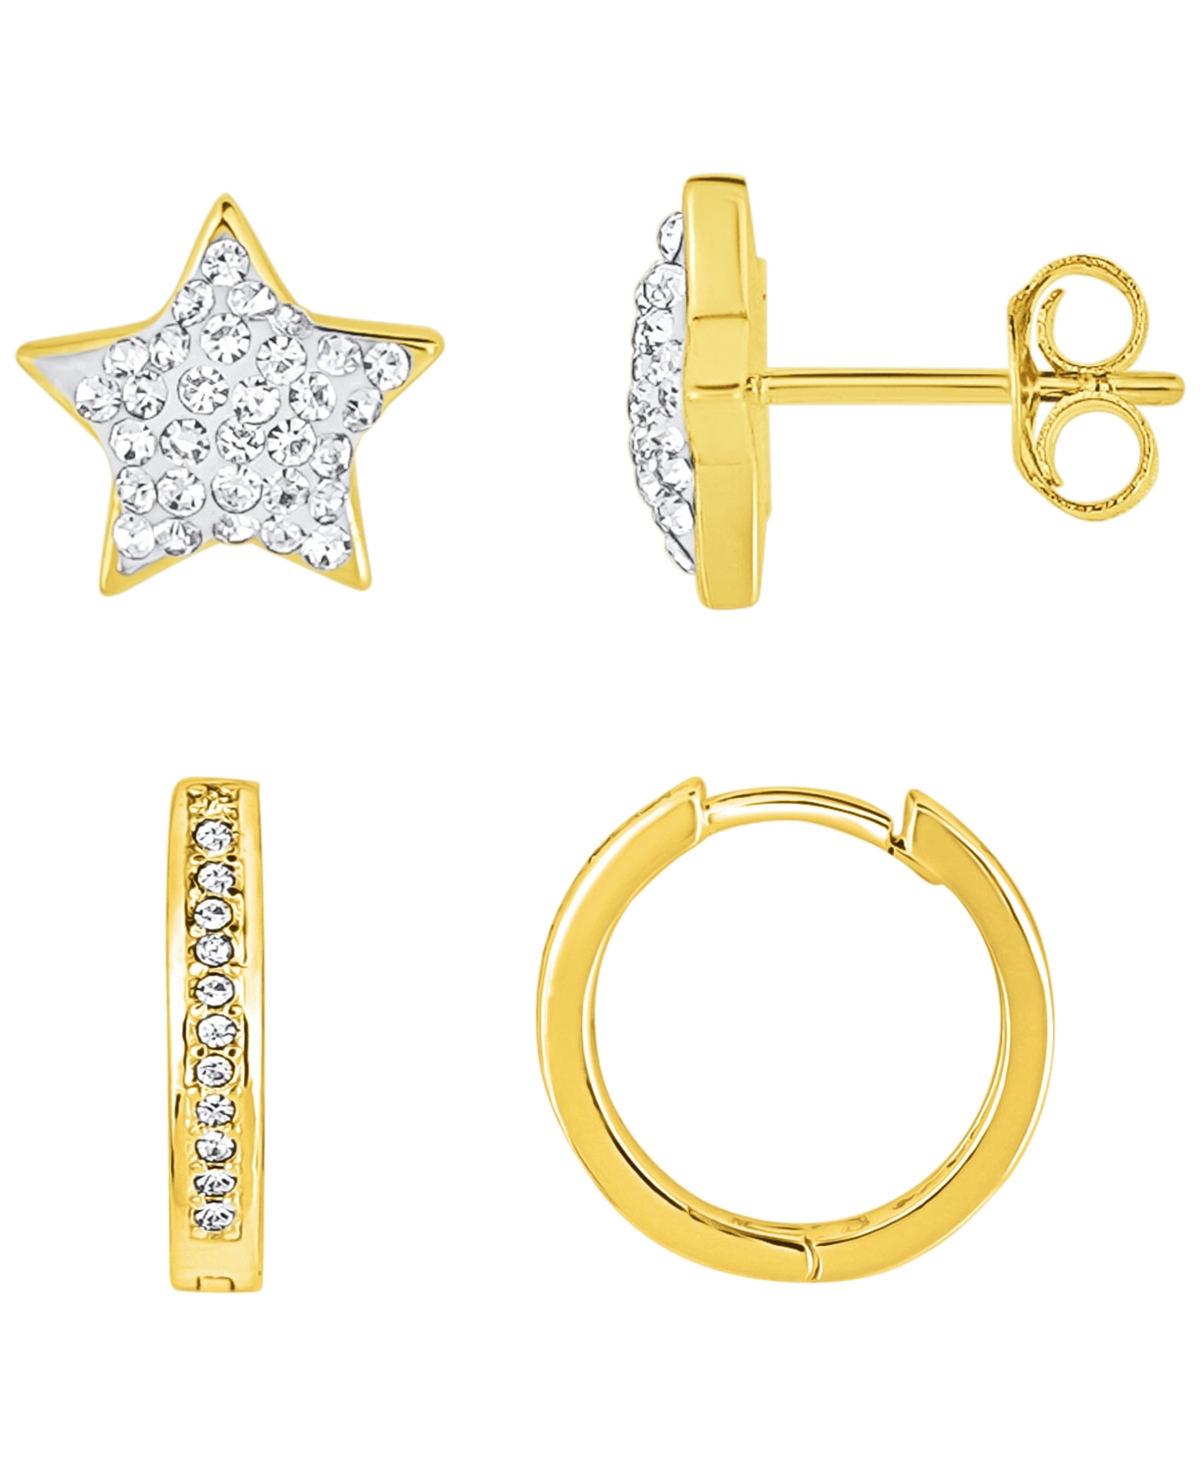 2 Pair Crystal Hinged Hoop and Crystal Pave Star Stud Gold-Plated Earring Set - Gold-Plated